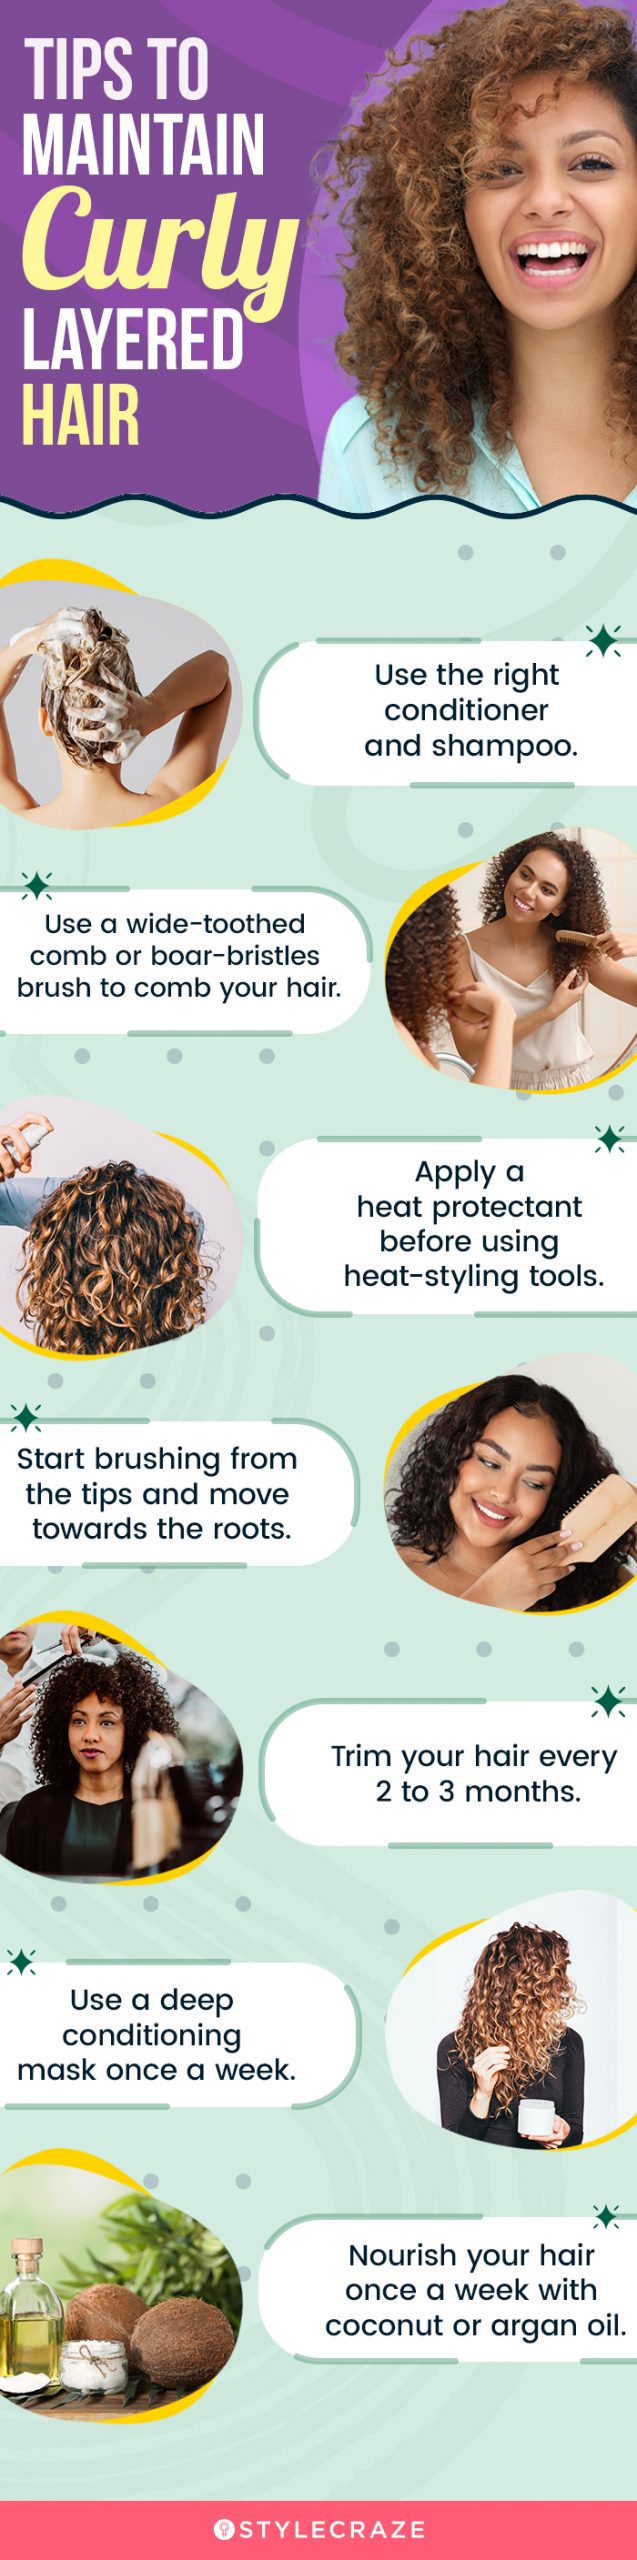 tips to maintain curly layered hair [infographic]